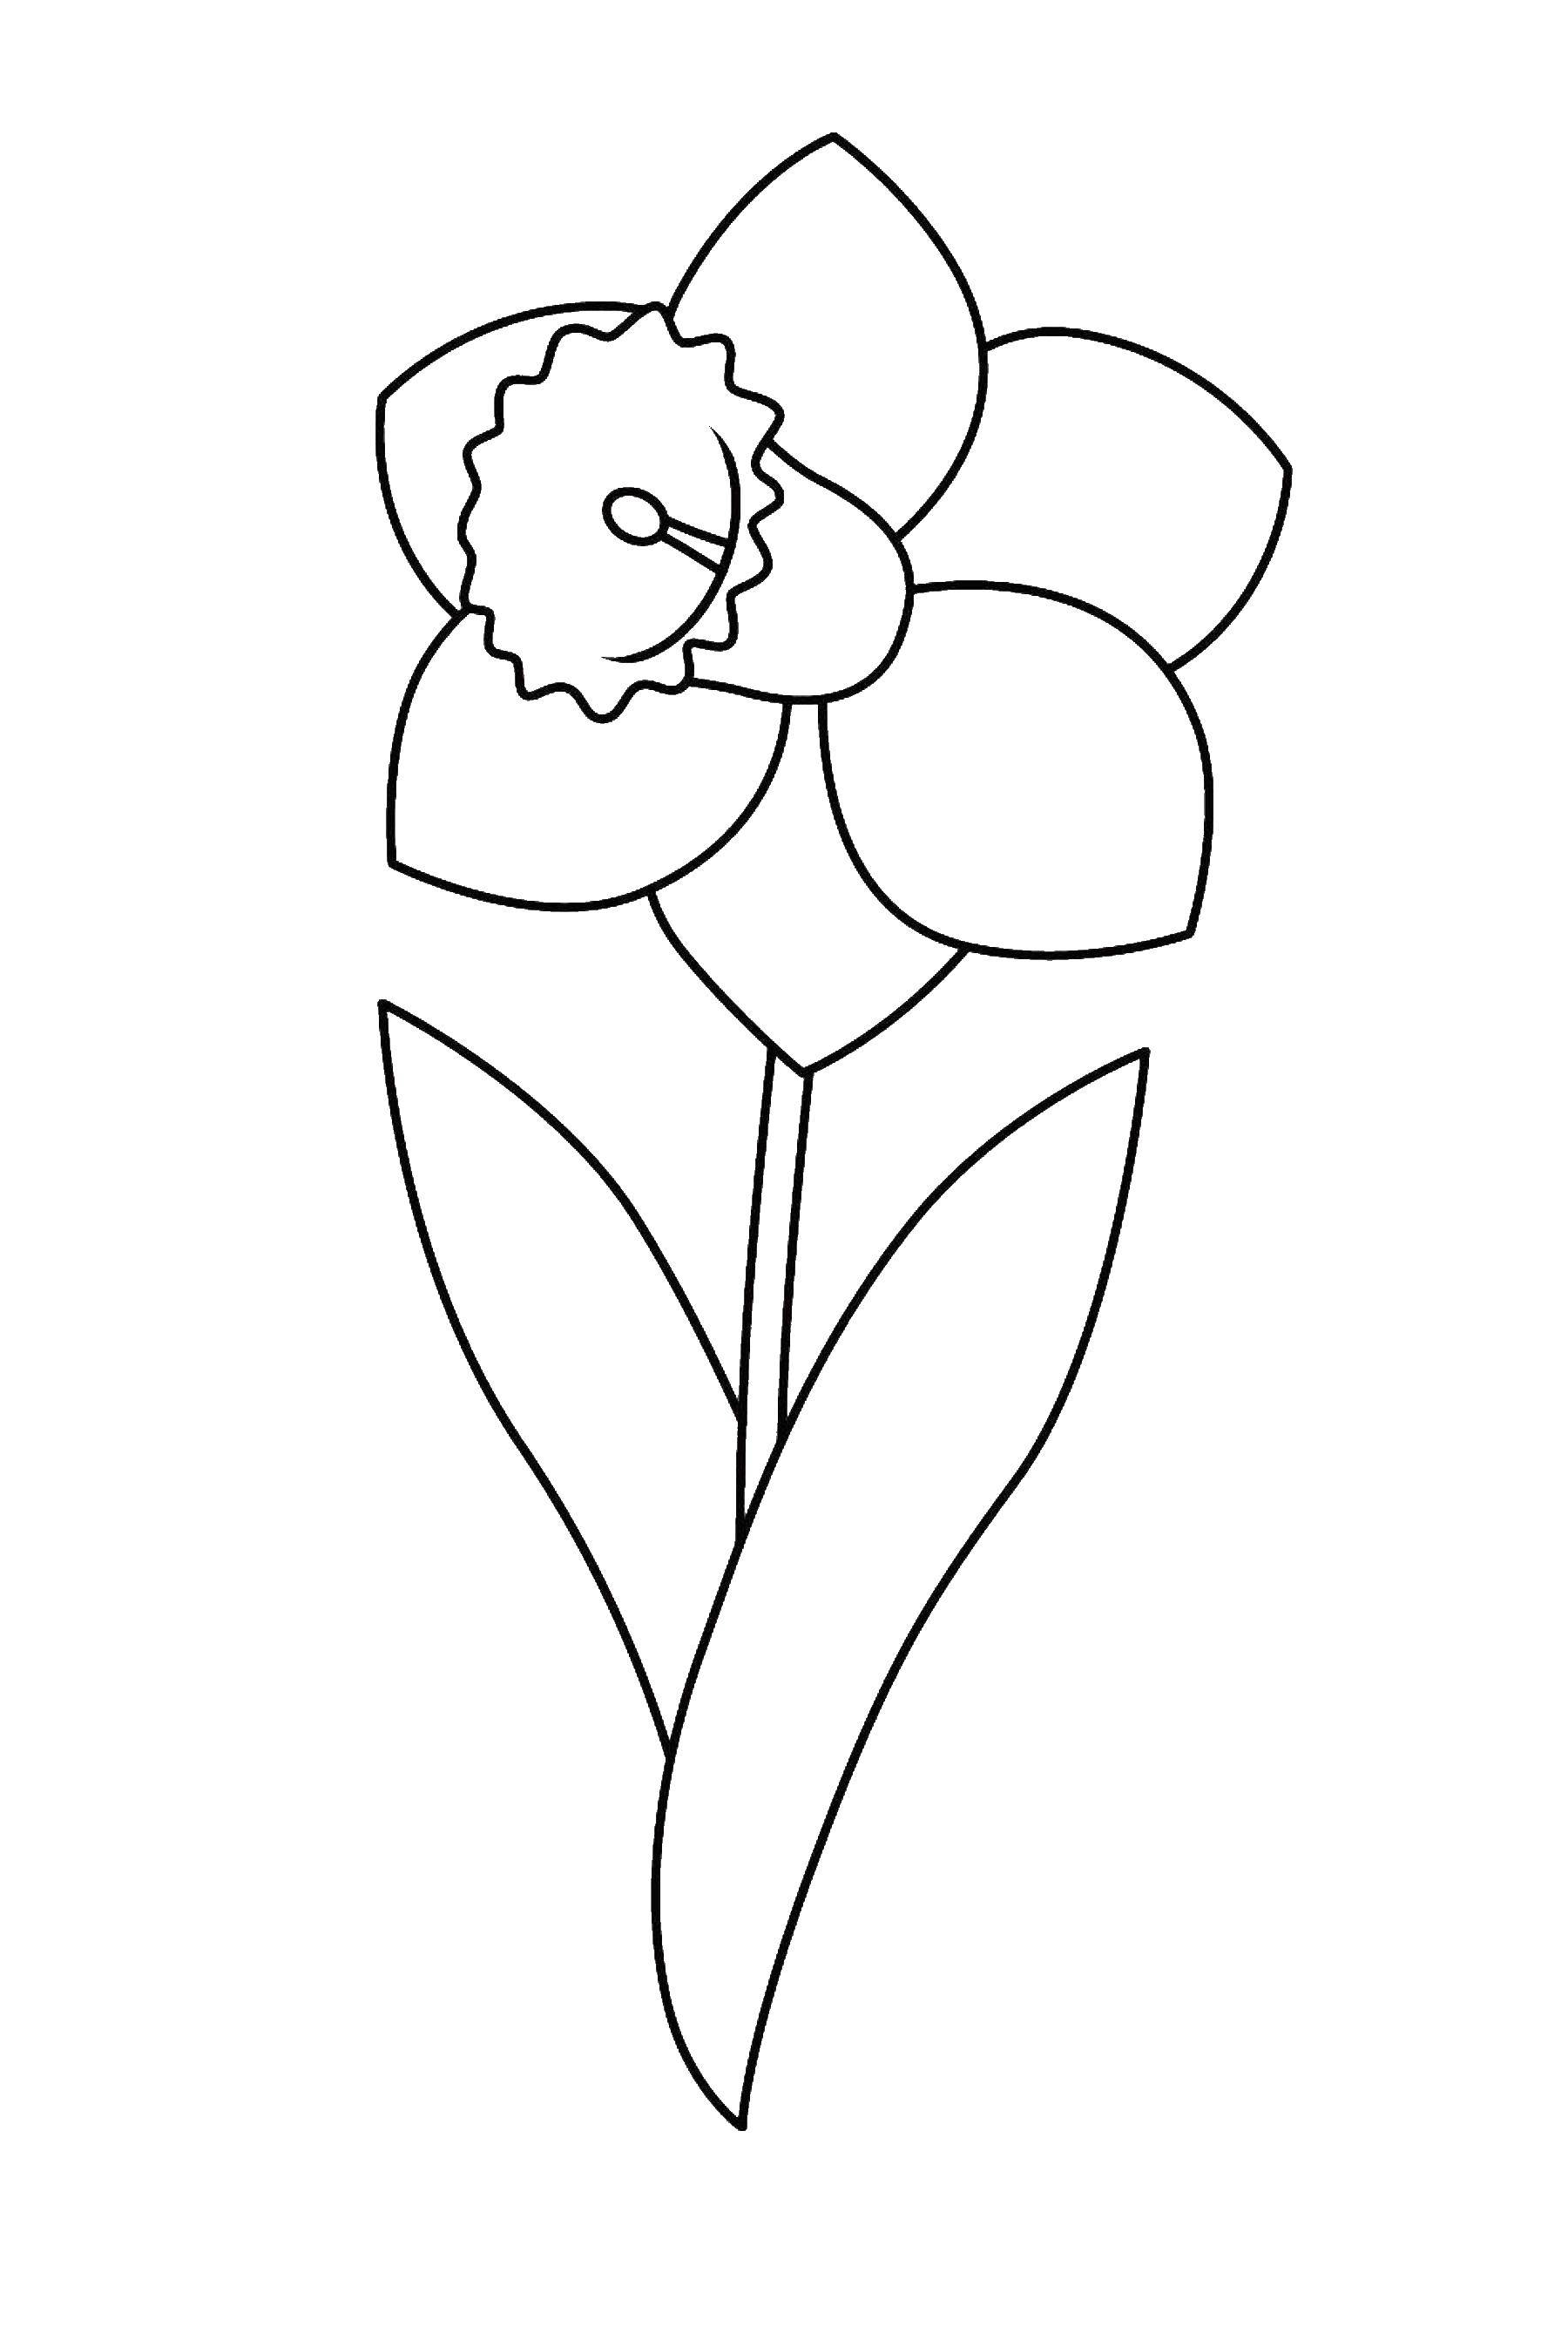 Coloring Beautiful Narcissus. Category flowers. Tags:  Flowers, Narcissus.